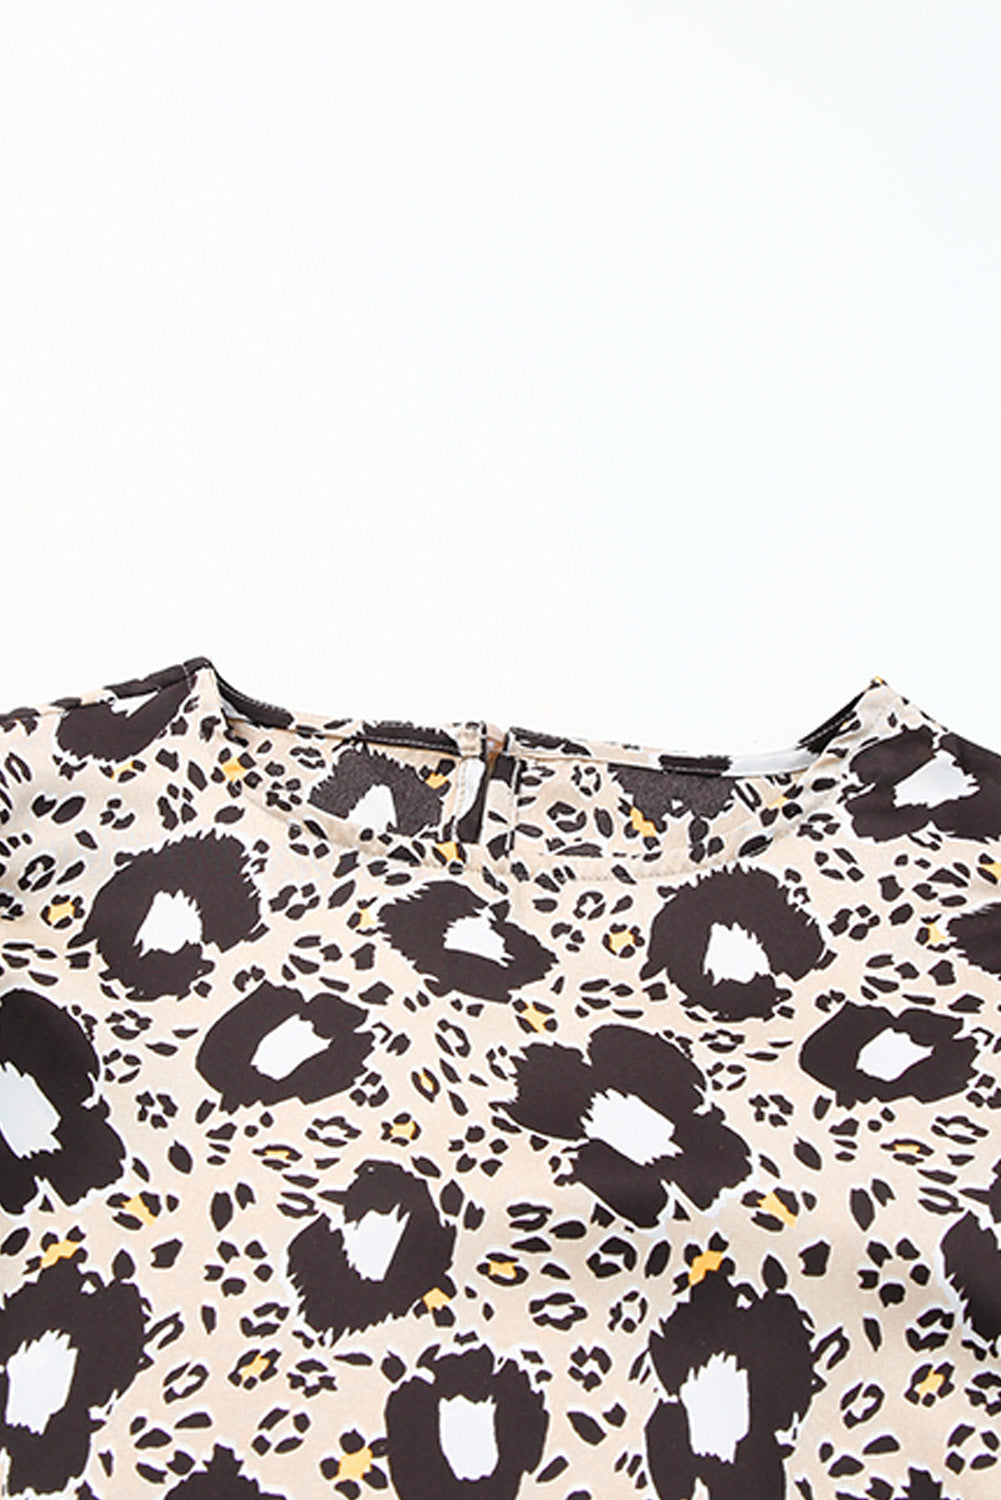 Stylish round neck blouse with animal print and puff sleeves